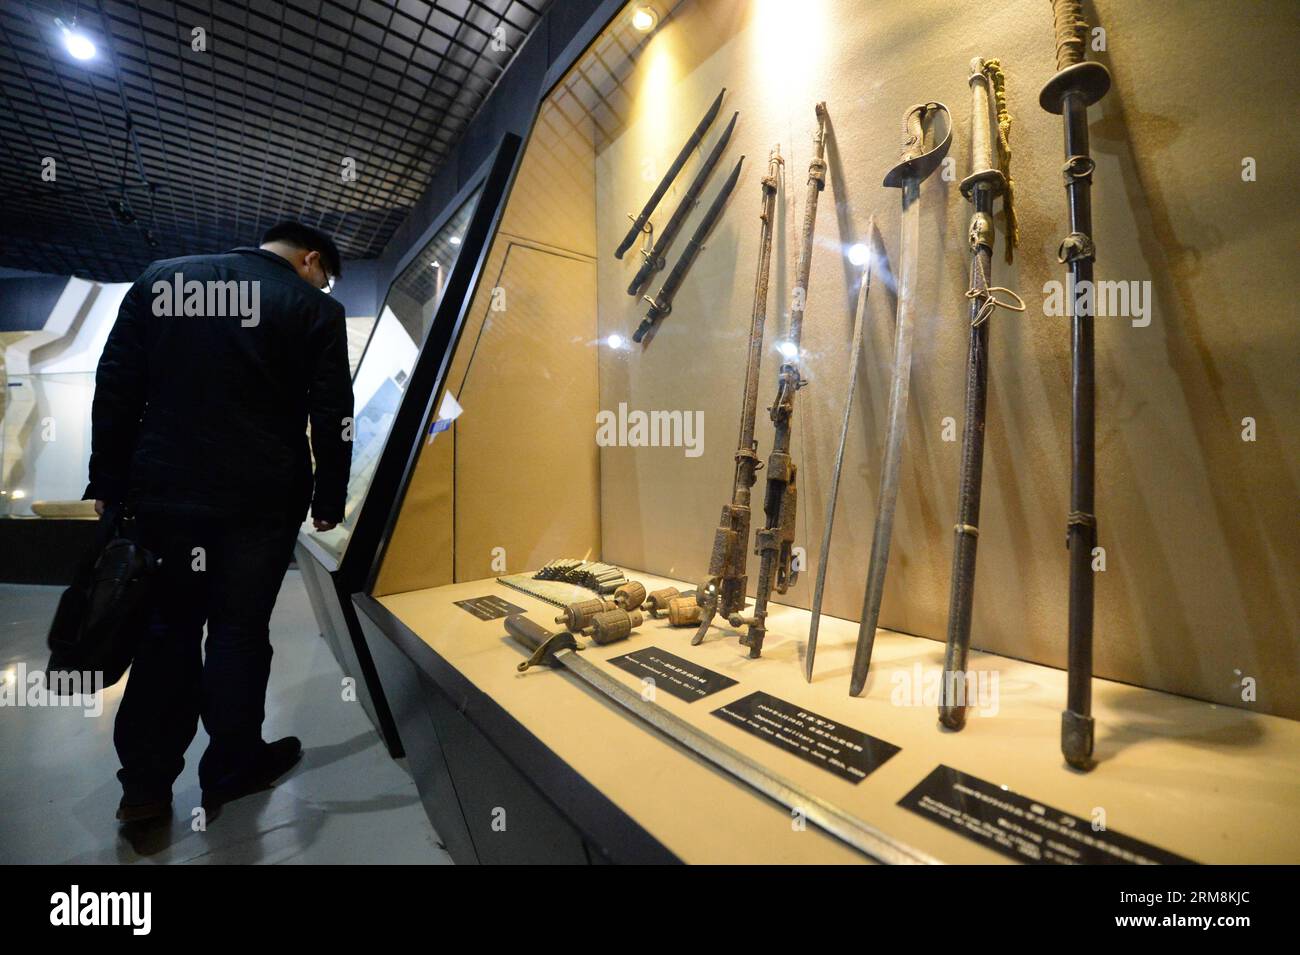 (140418) -- HARBIN, April 18, 2014 (Xinhua) -- A man looks at weapons used by Japanese invaders at a museum on Unit 731 in Harbin, capital of northeast China s Heilongjiang Province, April 18, 2014. Unit 731 was a Harbin-based biological and chemical warfare research unit of the Japanese army during WWII. The Unit 731 facility ruins in Harbin are evidences of the wartime atrocities committed by Japanese invaders in China. Unit 731 members conducted a series of human experiments which subjected victims to vivisections, germ war attacks, weapon tests and other forms of torture. April 18 is the I Stock Photo